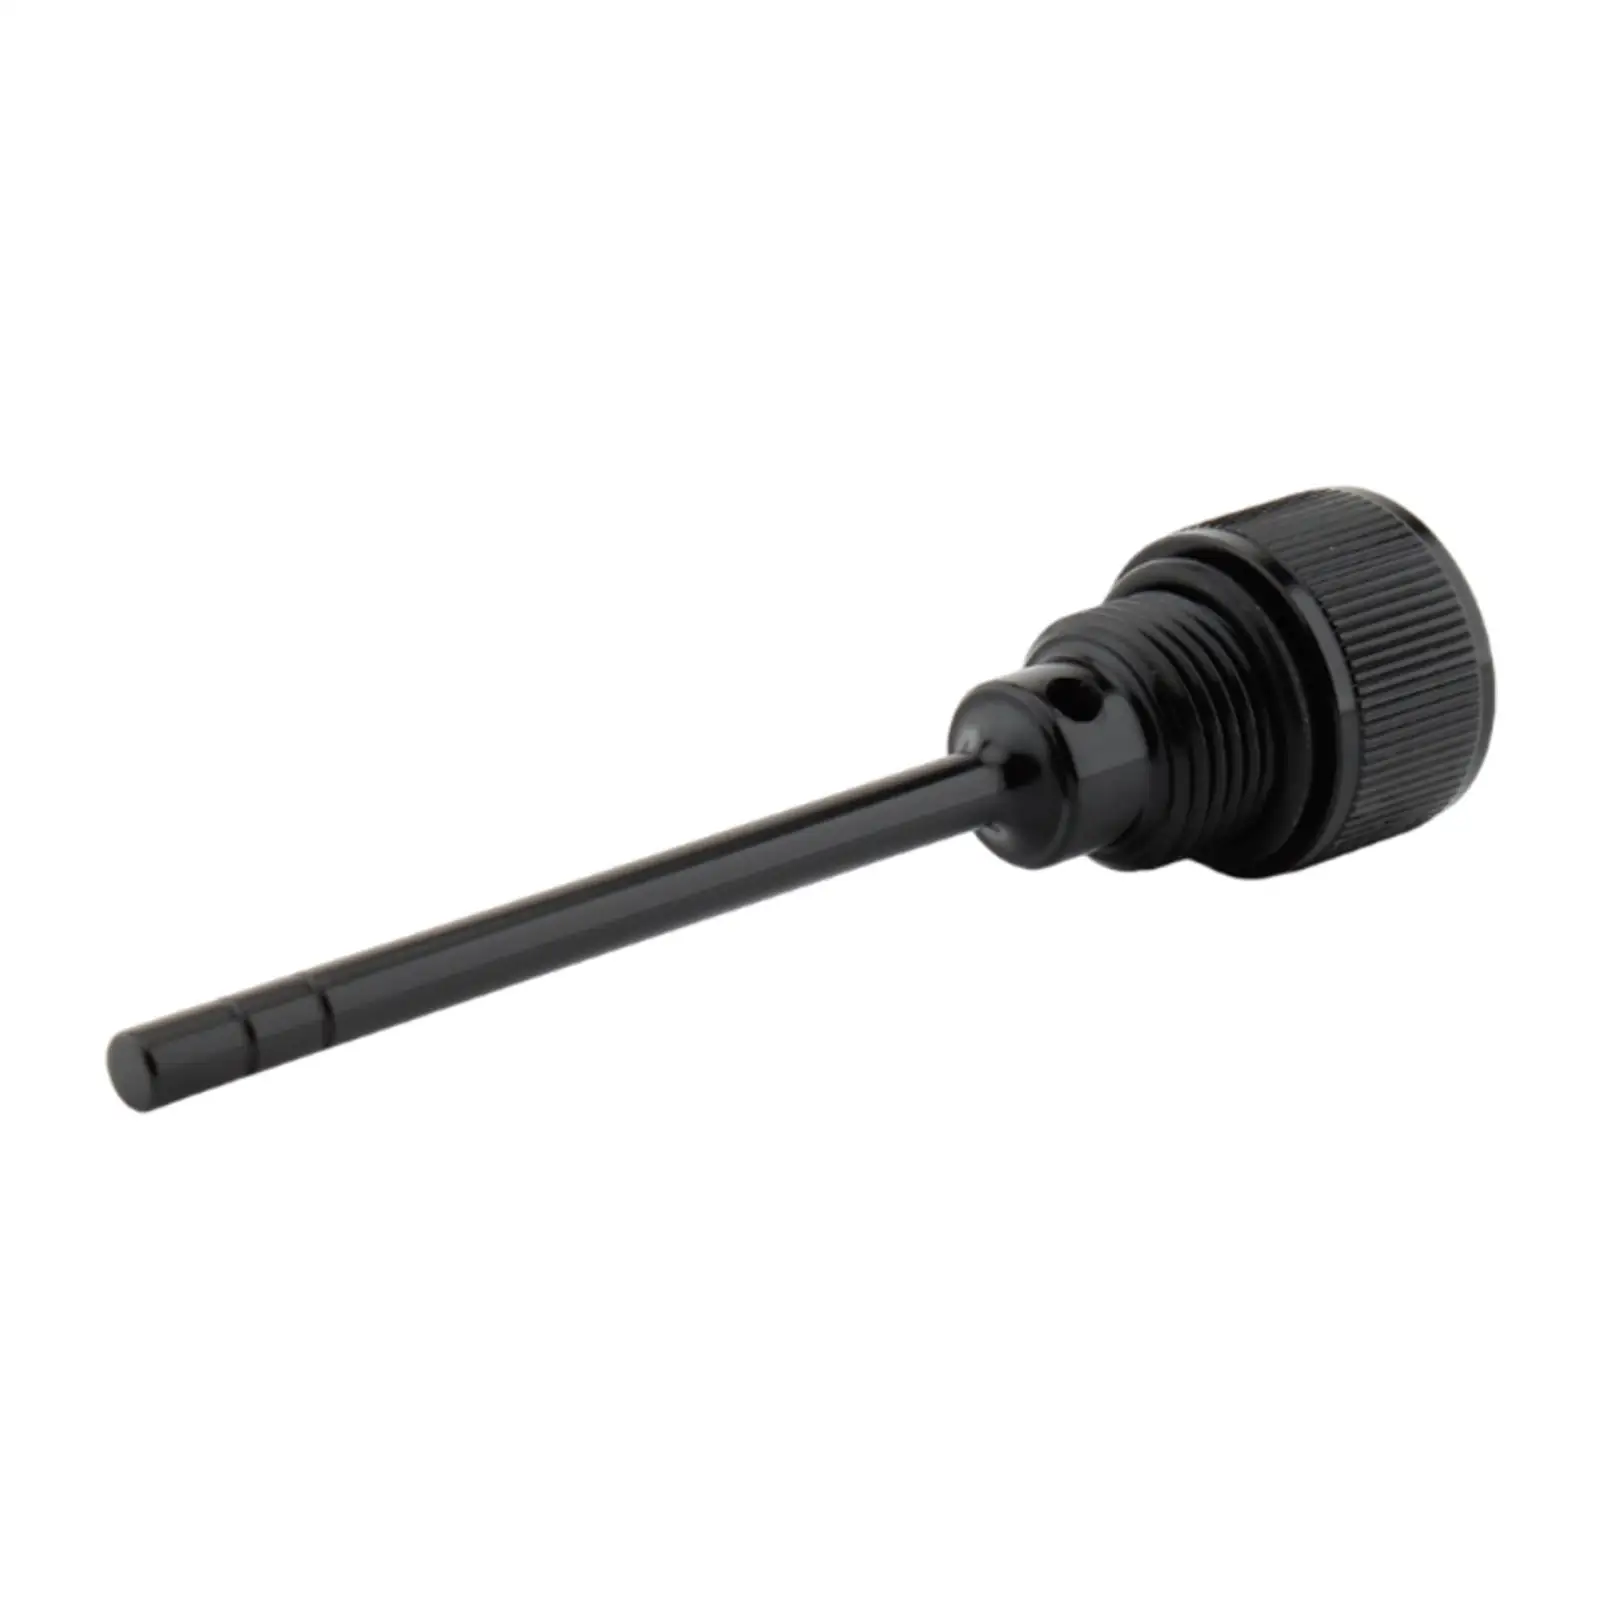 Transmission Oil Fill Plug Dipstick Direct Replaces for Fxs Flstfbs